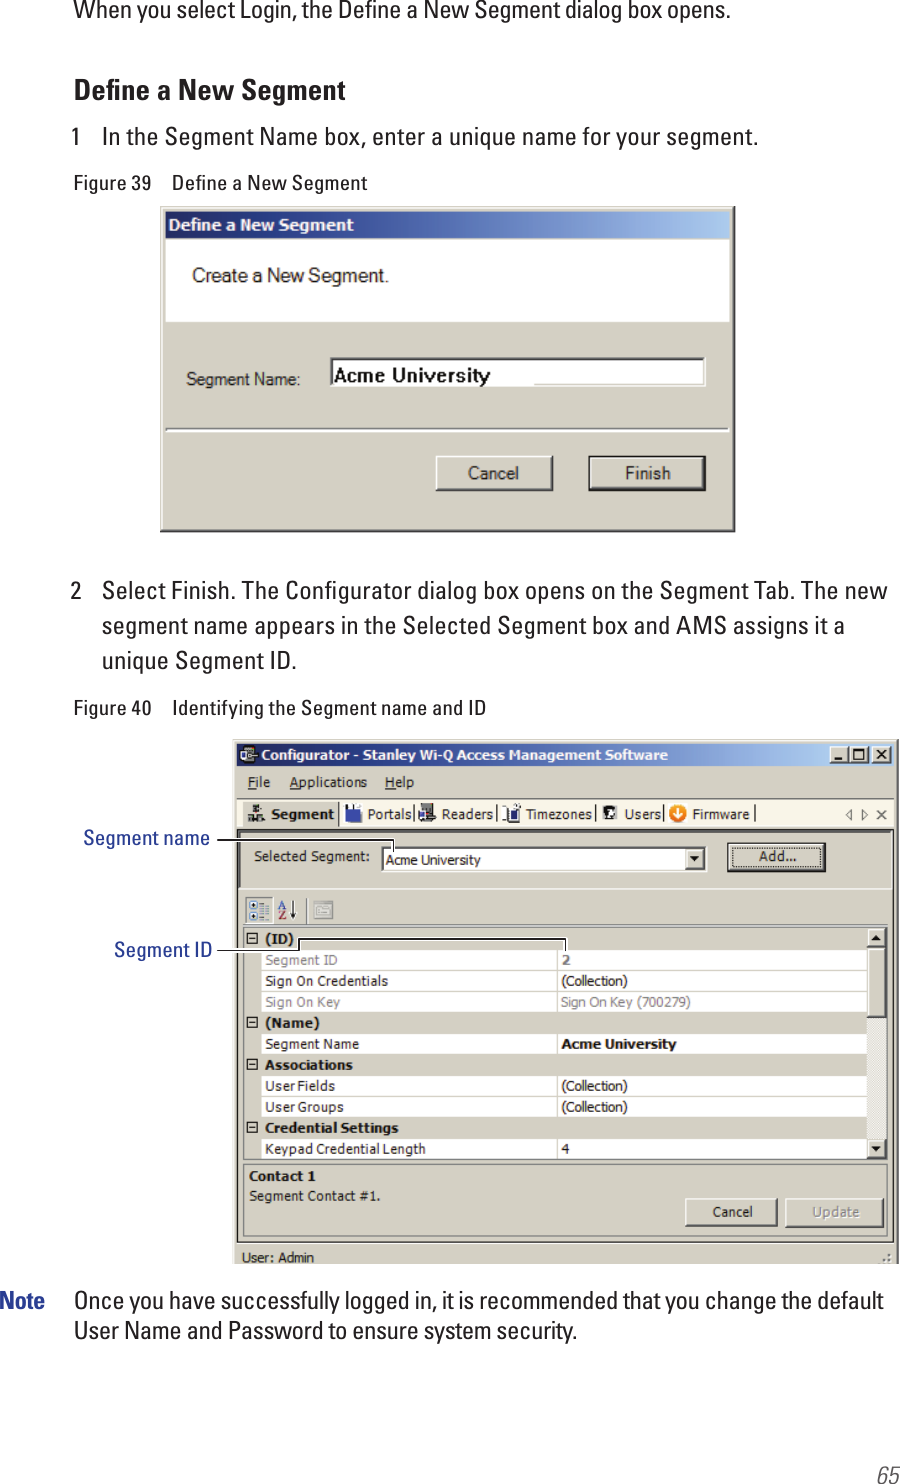 65When you select Login, the Deﬁne a New Segment dialog box opens. Deﬁne a New Segment1  In the Segment Name box, enter a unique name for your segment.Figure 39  Deﬁne a New Segment2  Select Finish. The Conﬁgurator dialog box opens on the Segment Tab. The new segment name appears in the Selected Segment box and AMS assigns it a unique Segment ID.Figure 40  Identifying the Segment name and IDNote  Once you have successfully logged in, it is recommended that you change the default User Name and Password to ensure system security.Segment nameSegment ID